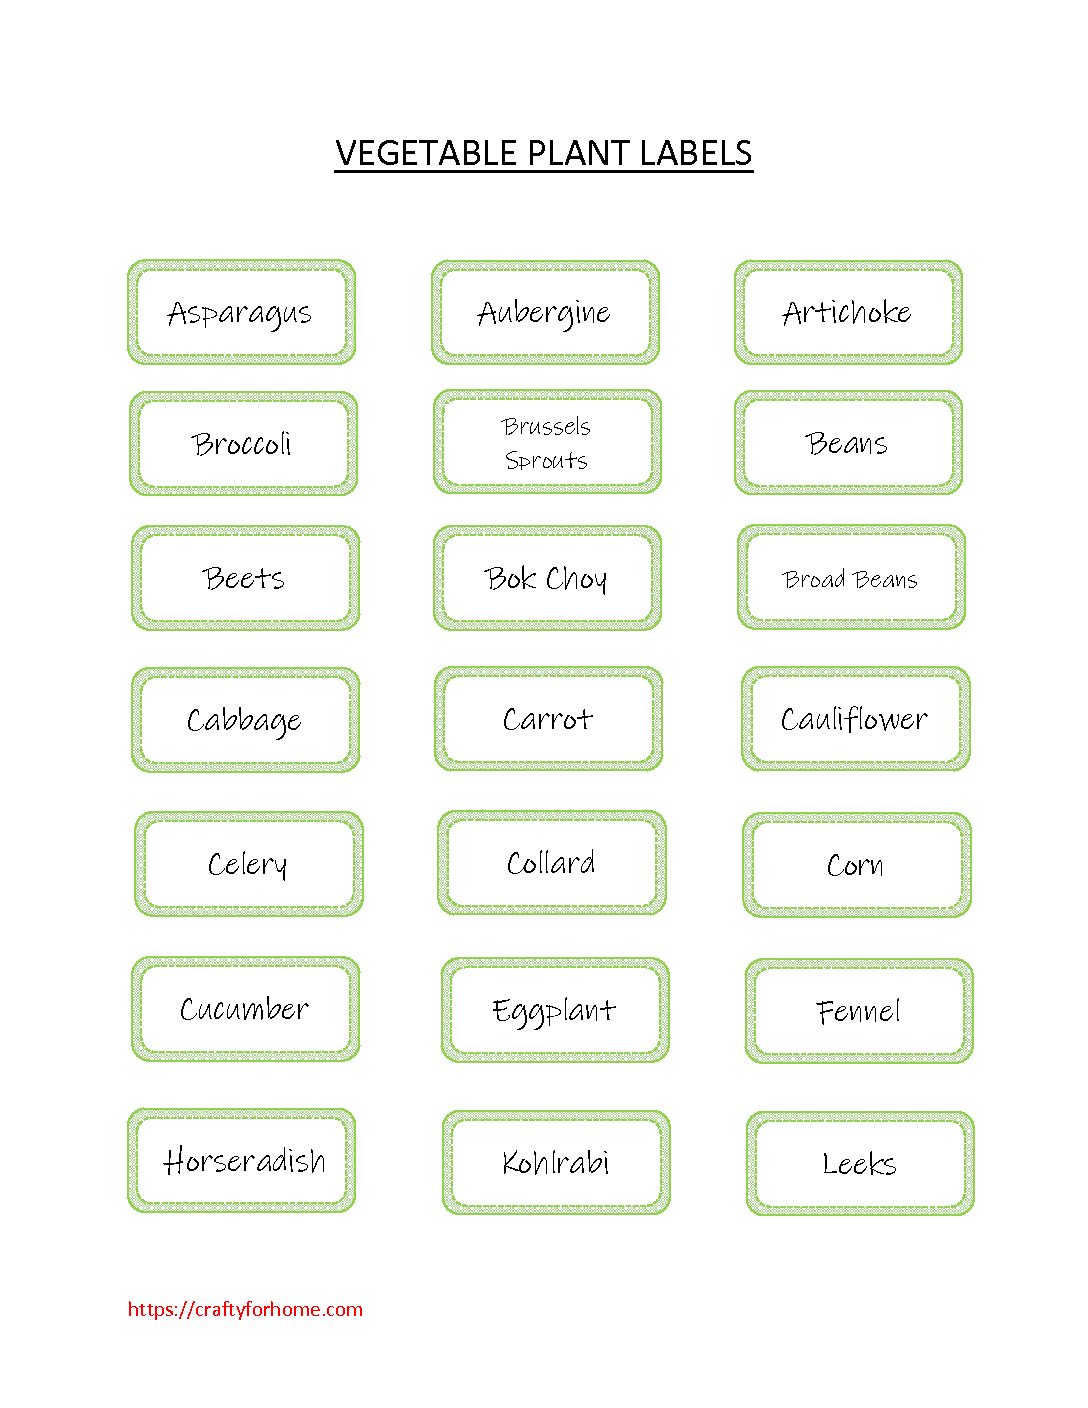 vegetable-plant-labels-crafty-for-home